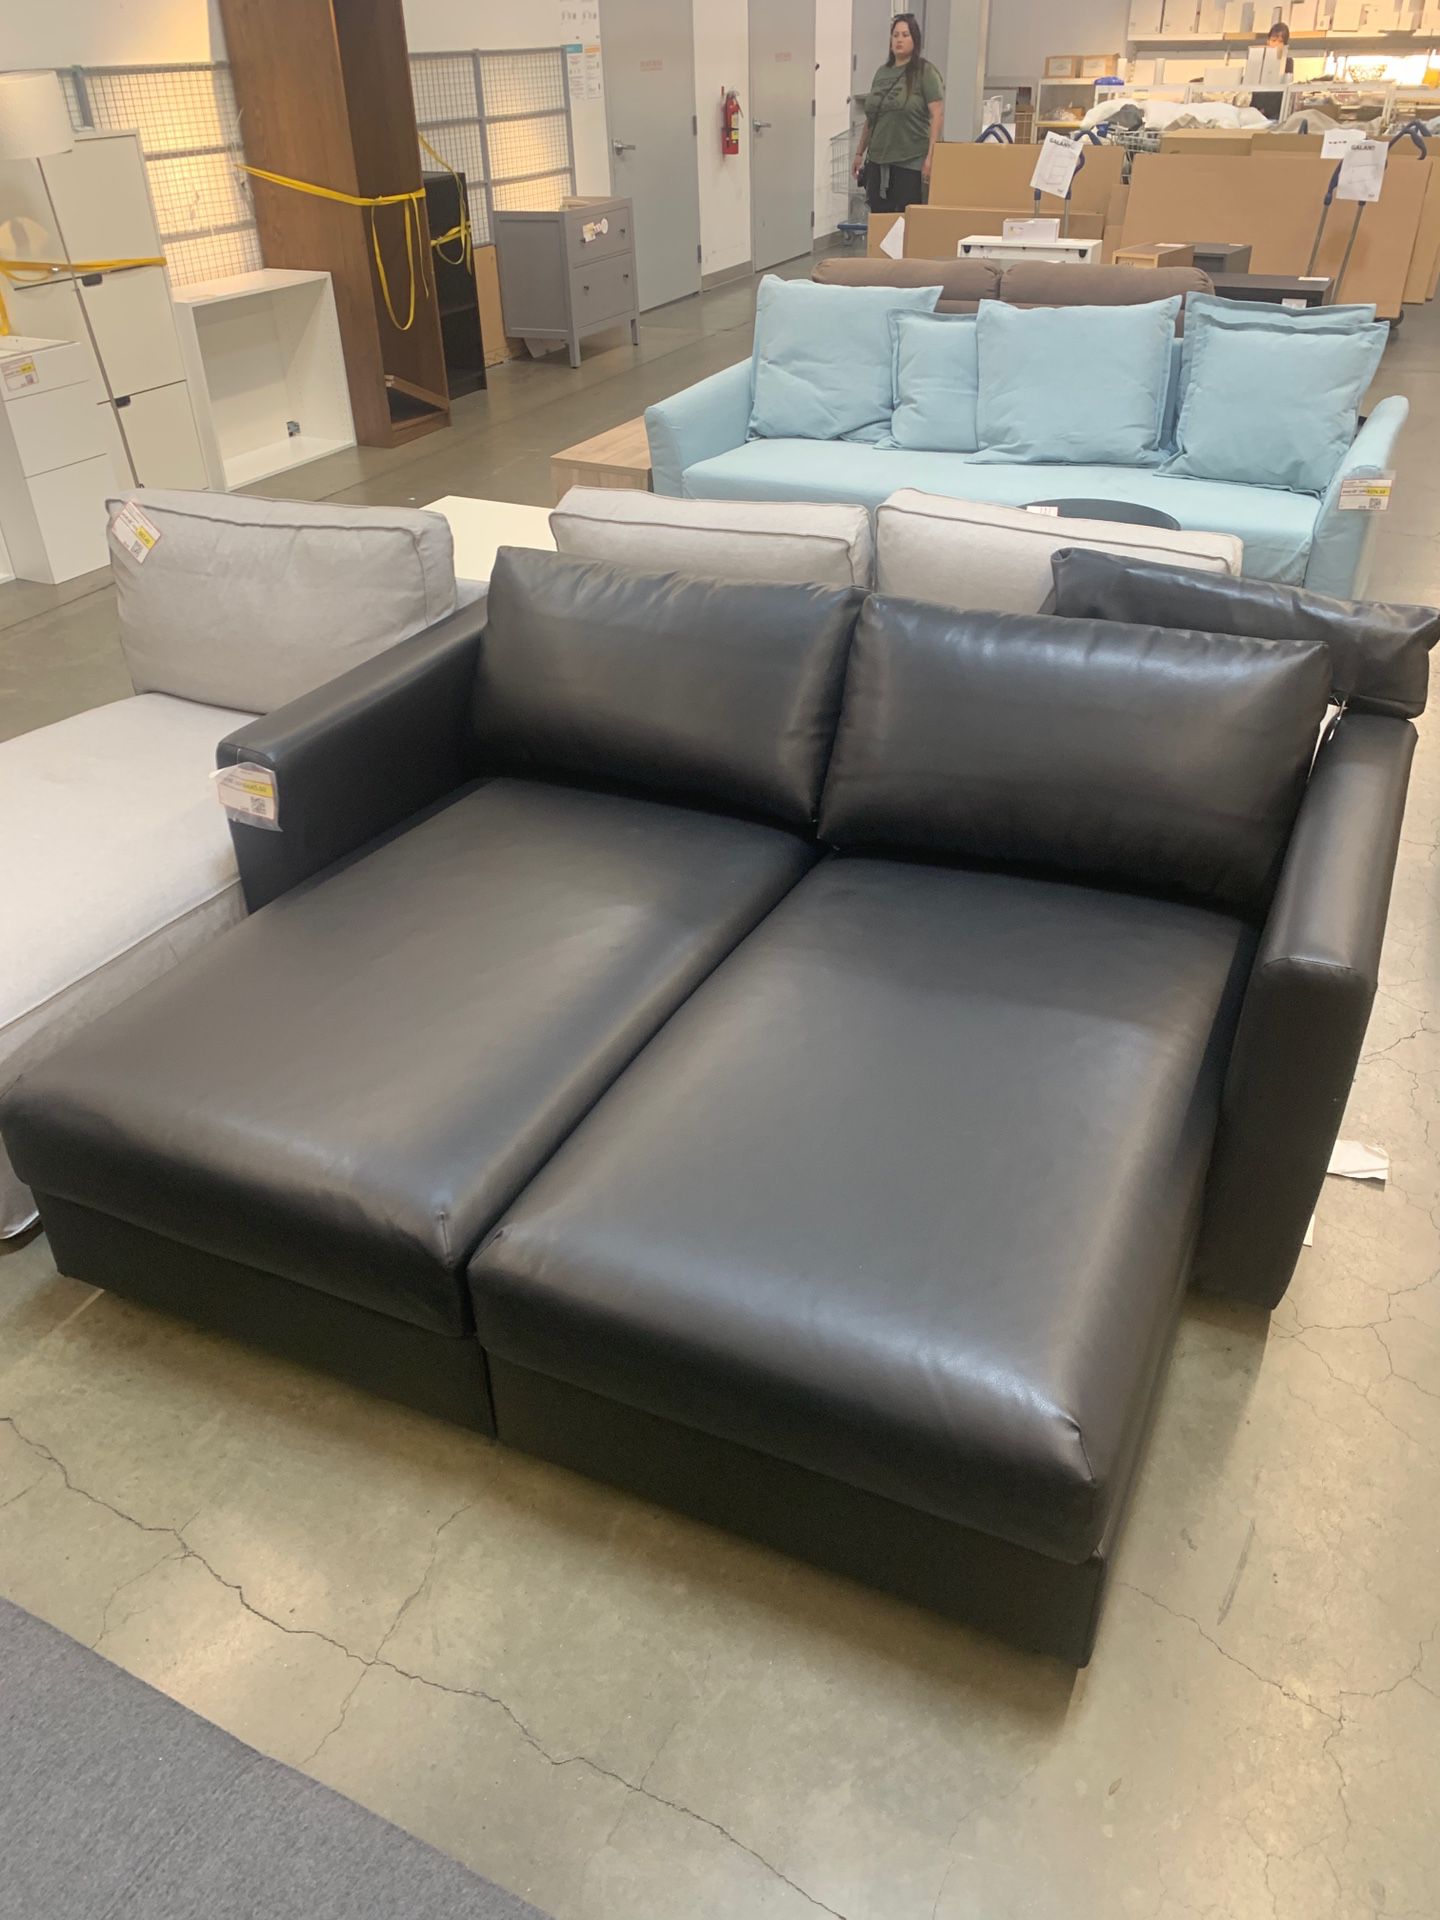 Black leather couch sofa with TONS of storage